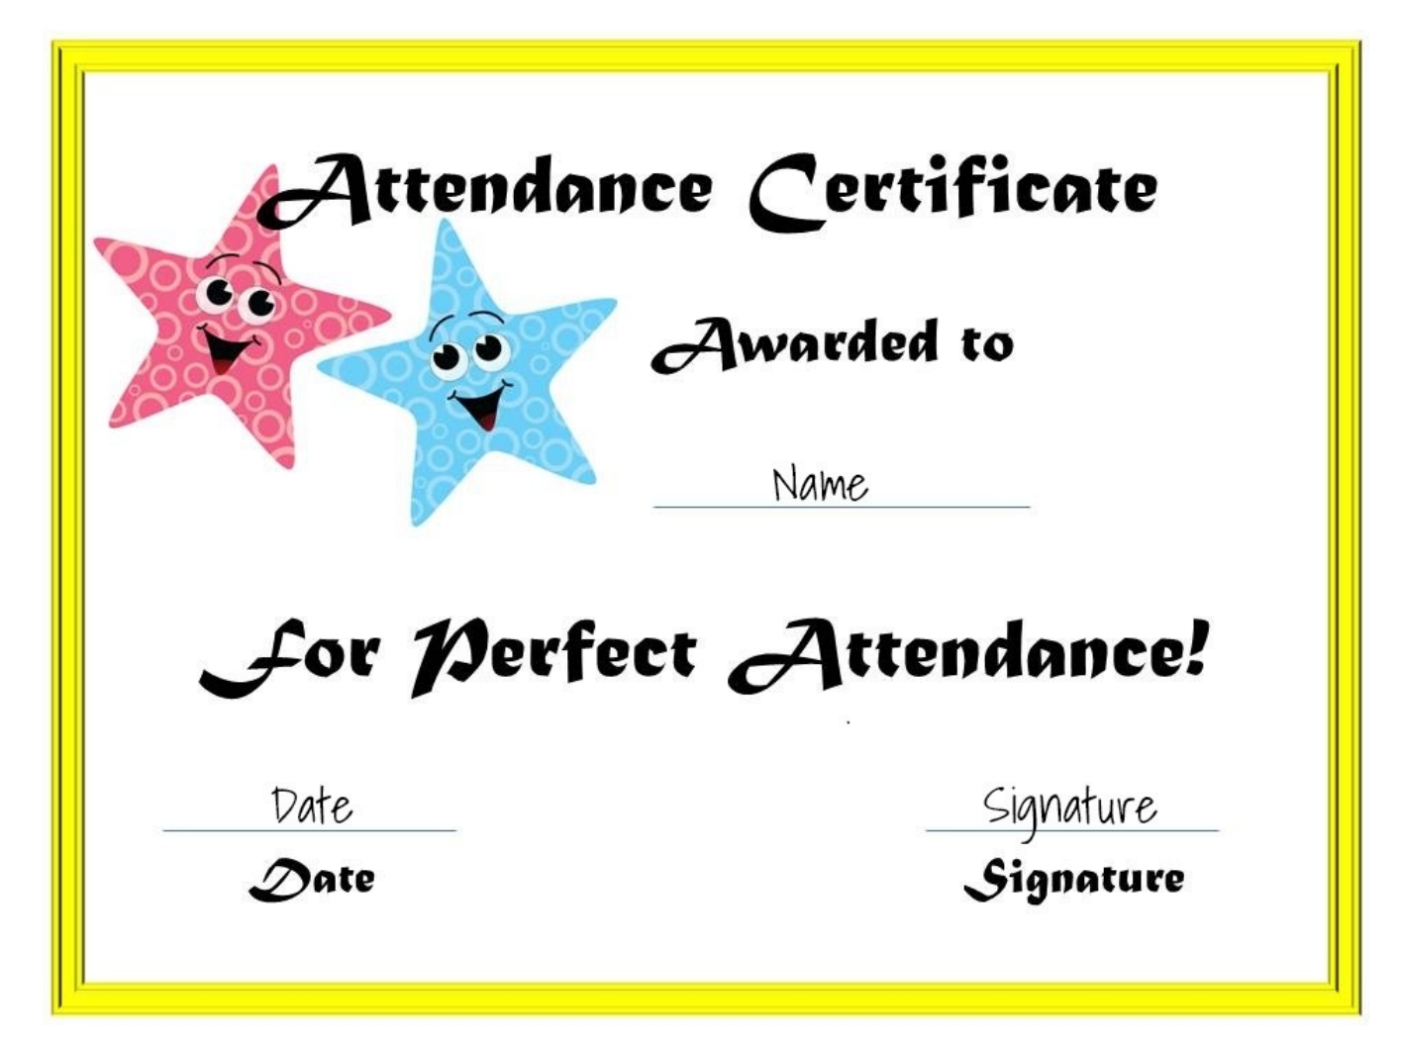 Conference Certificate Of Attendance Template – Edit, Fill, Sign Online In Conference Certificate Of Attendance Template